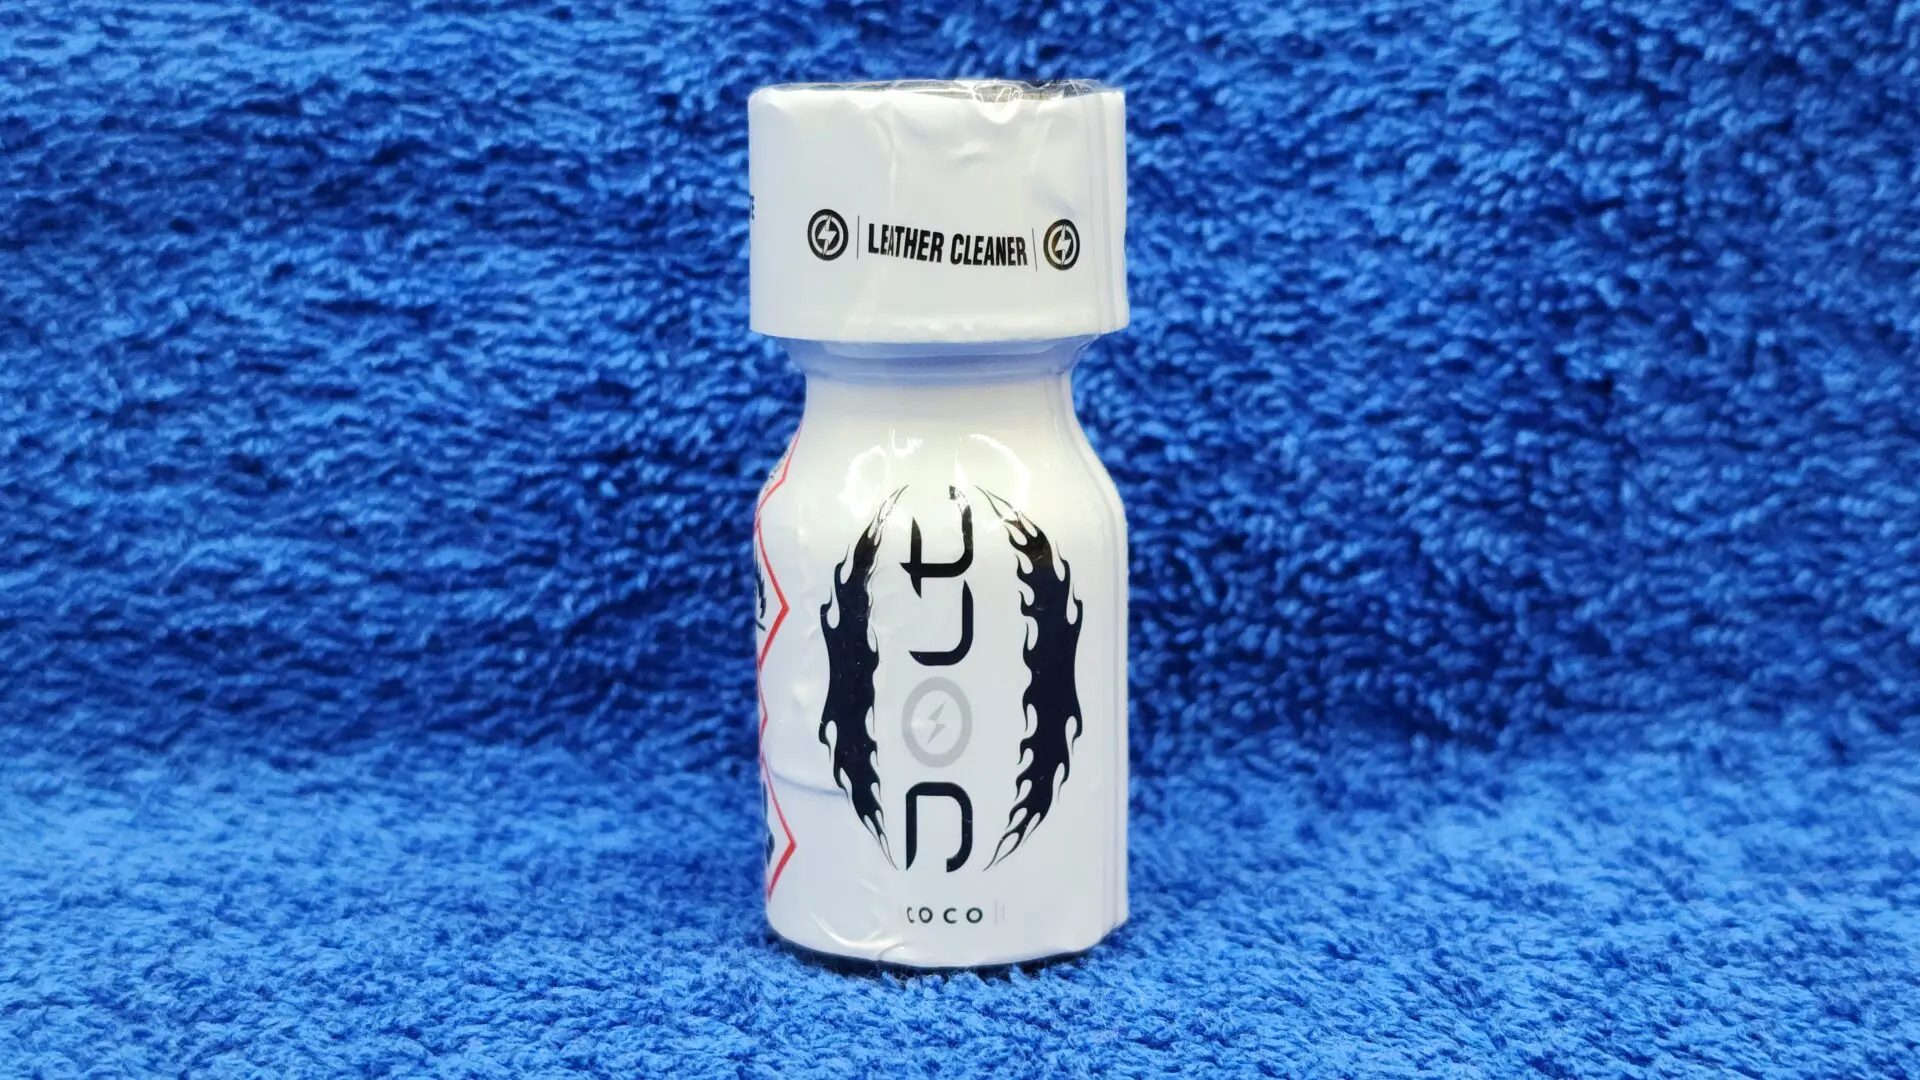 A small white bottle of Jolt Coconut cleaner labeled "loco" with a black and red dragon graphic, on a blue textured background.